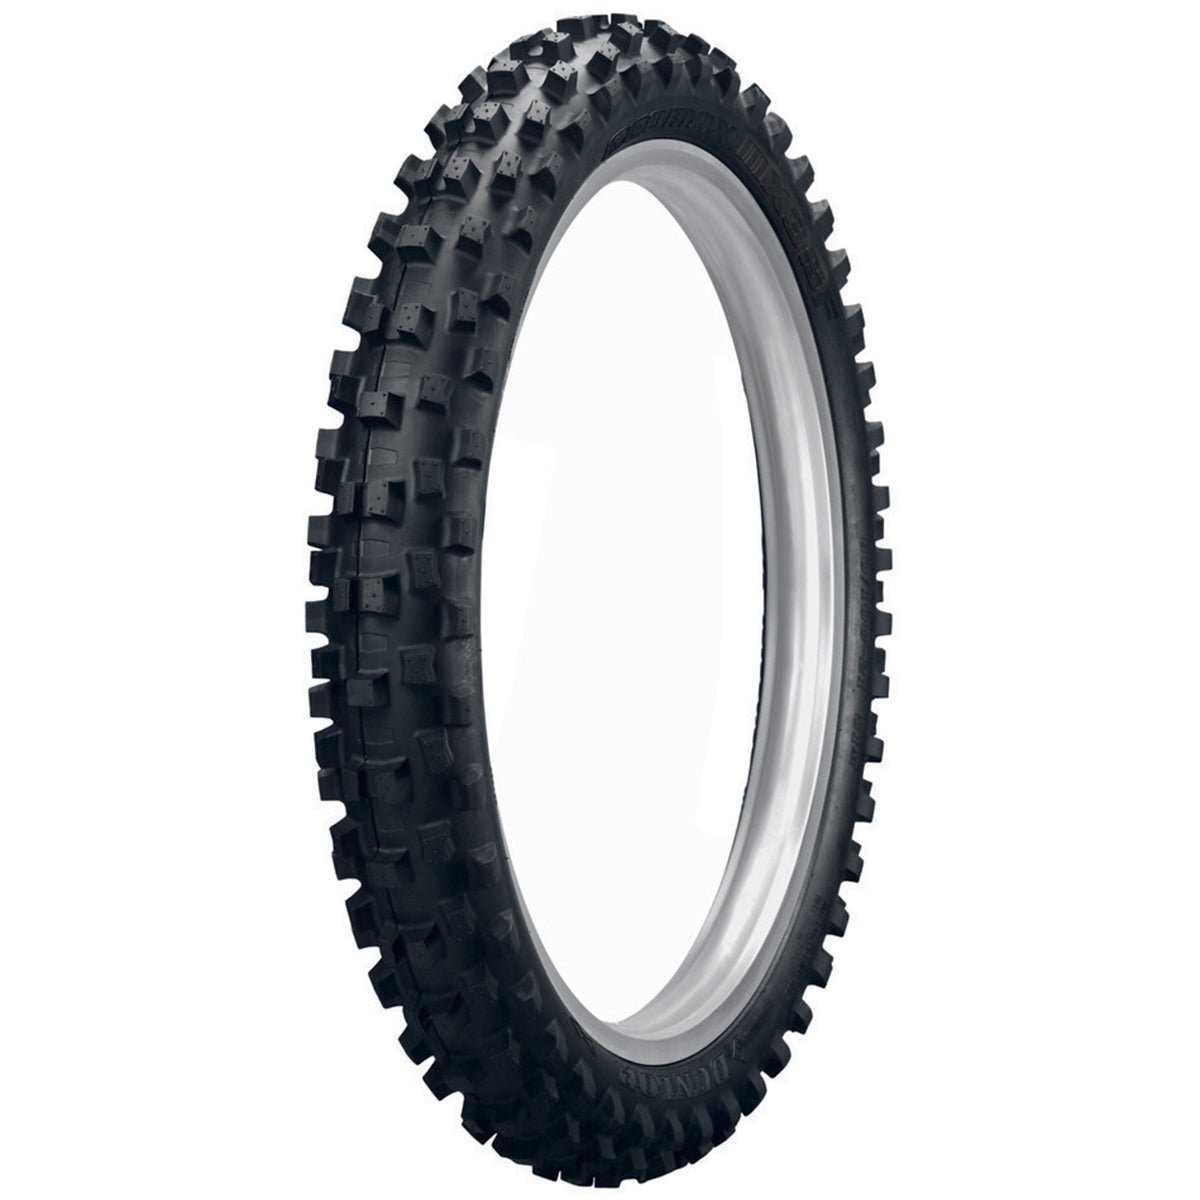 Dunlop Geomax MX-3S 21" Front Off-Road Tires-0312